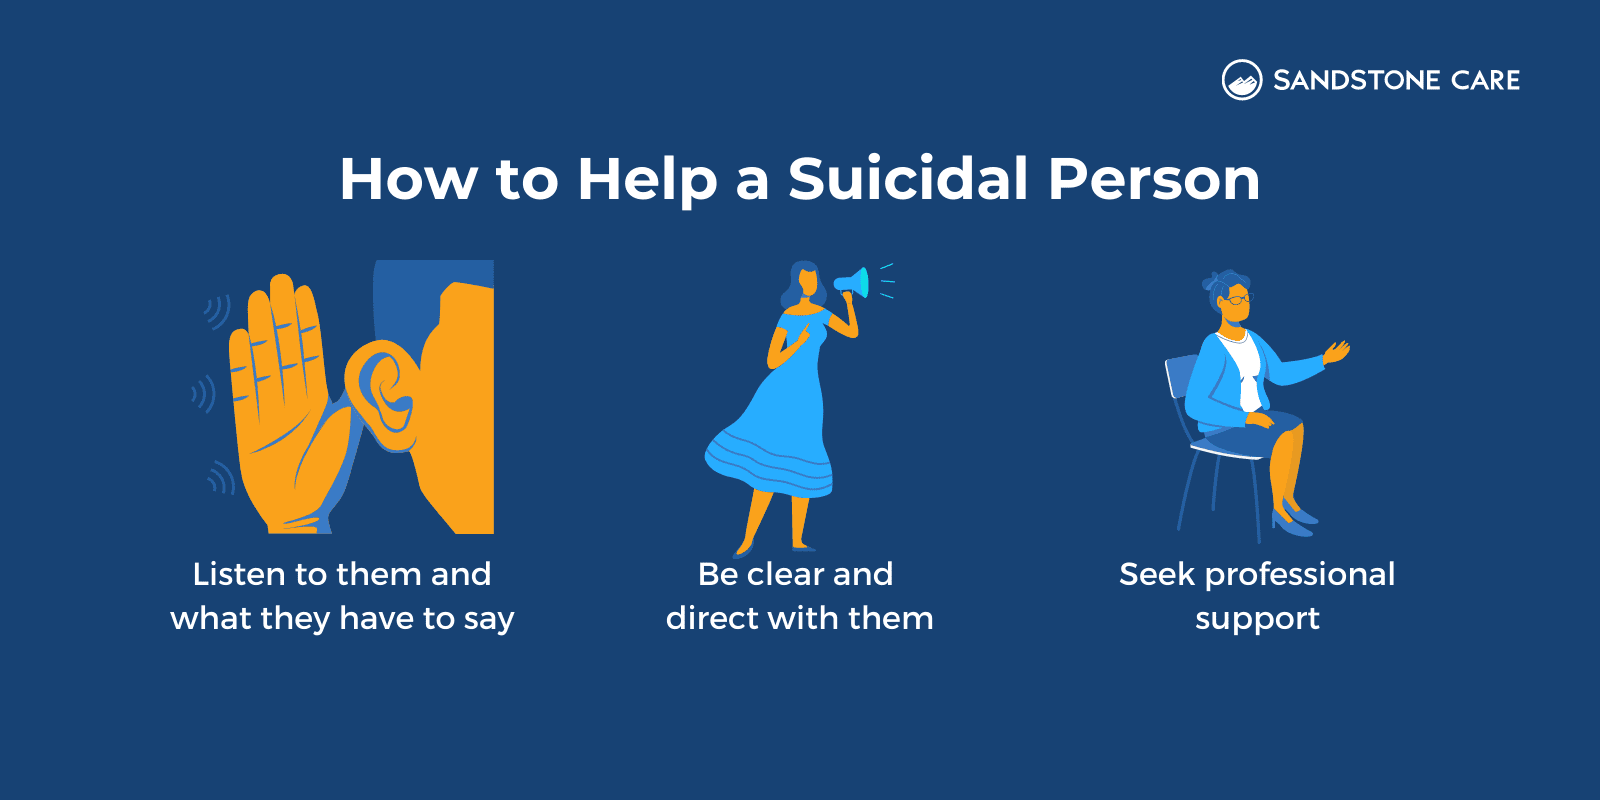 How to help a suicidal person illustrated into 3 list items of helping methods with digital illustrations